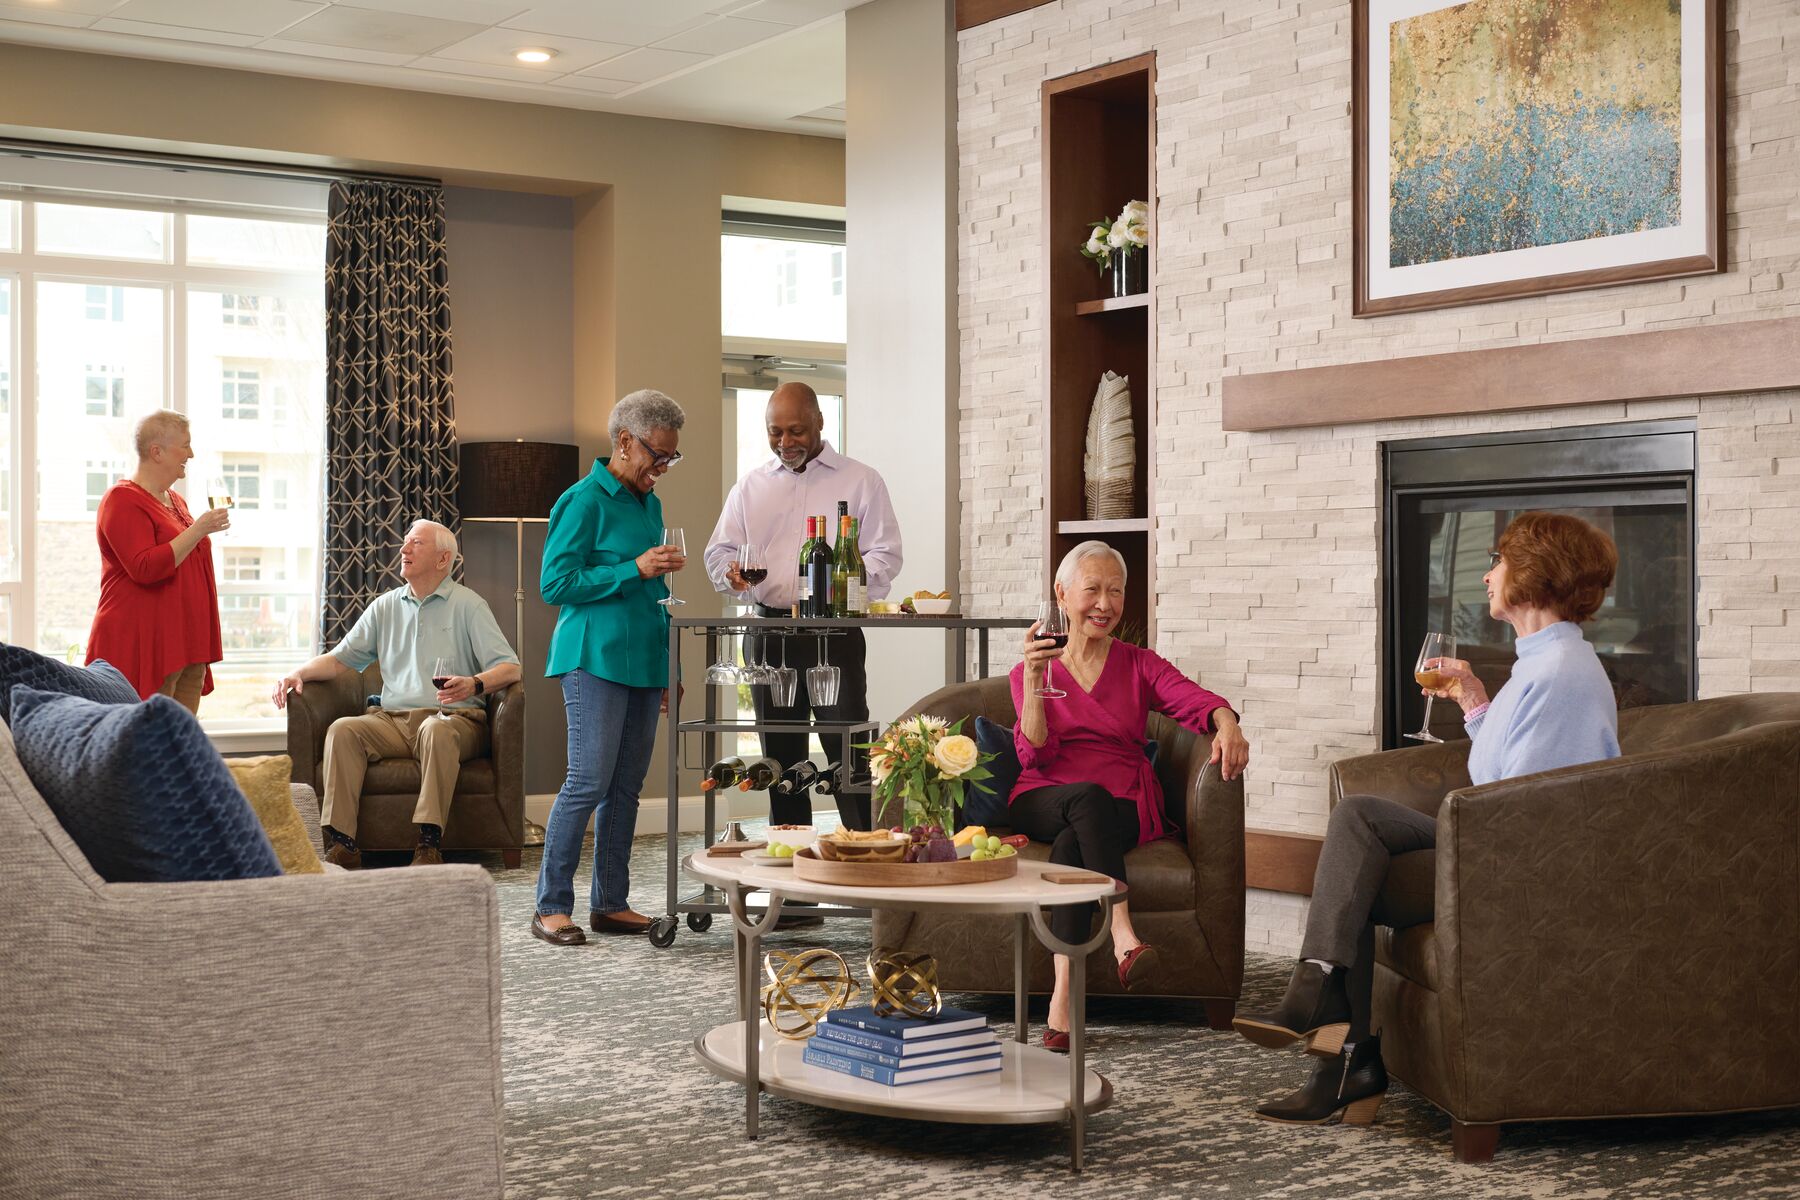 A diverse group of residents gathered together in a community clubhouse.